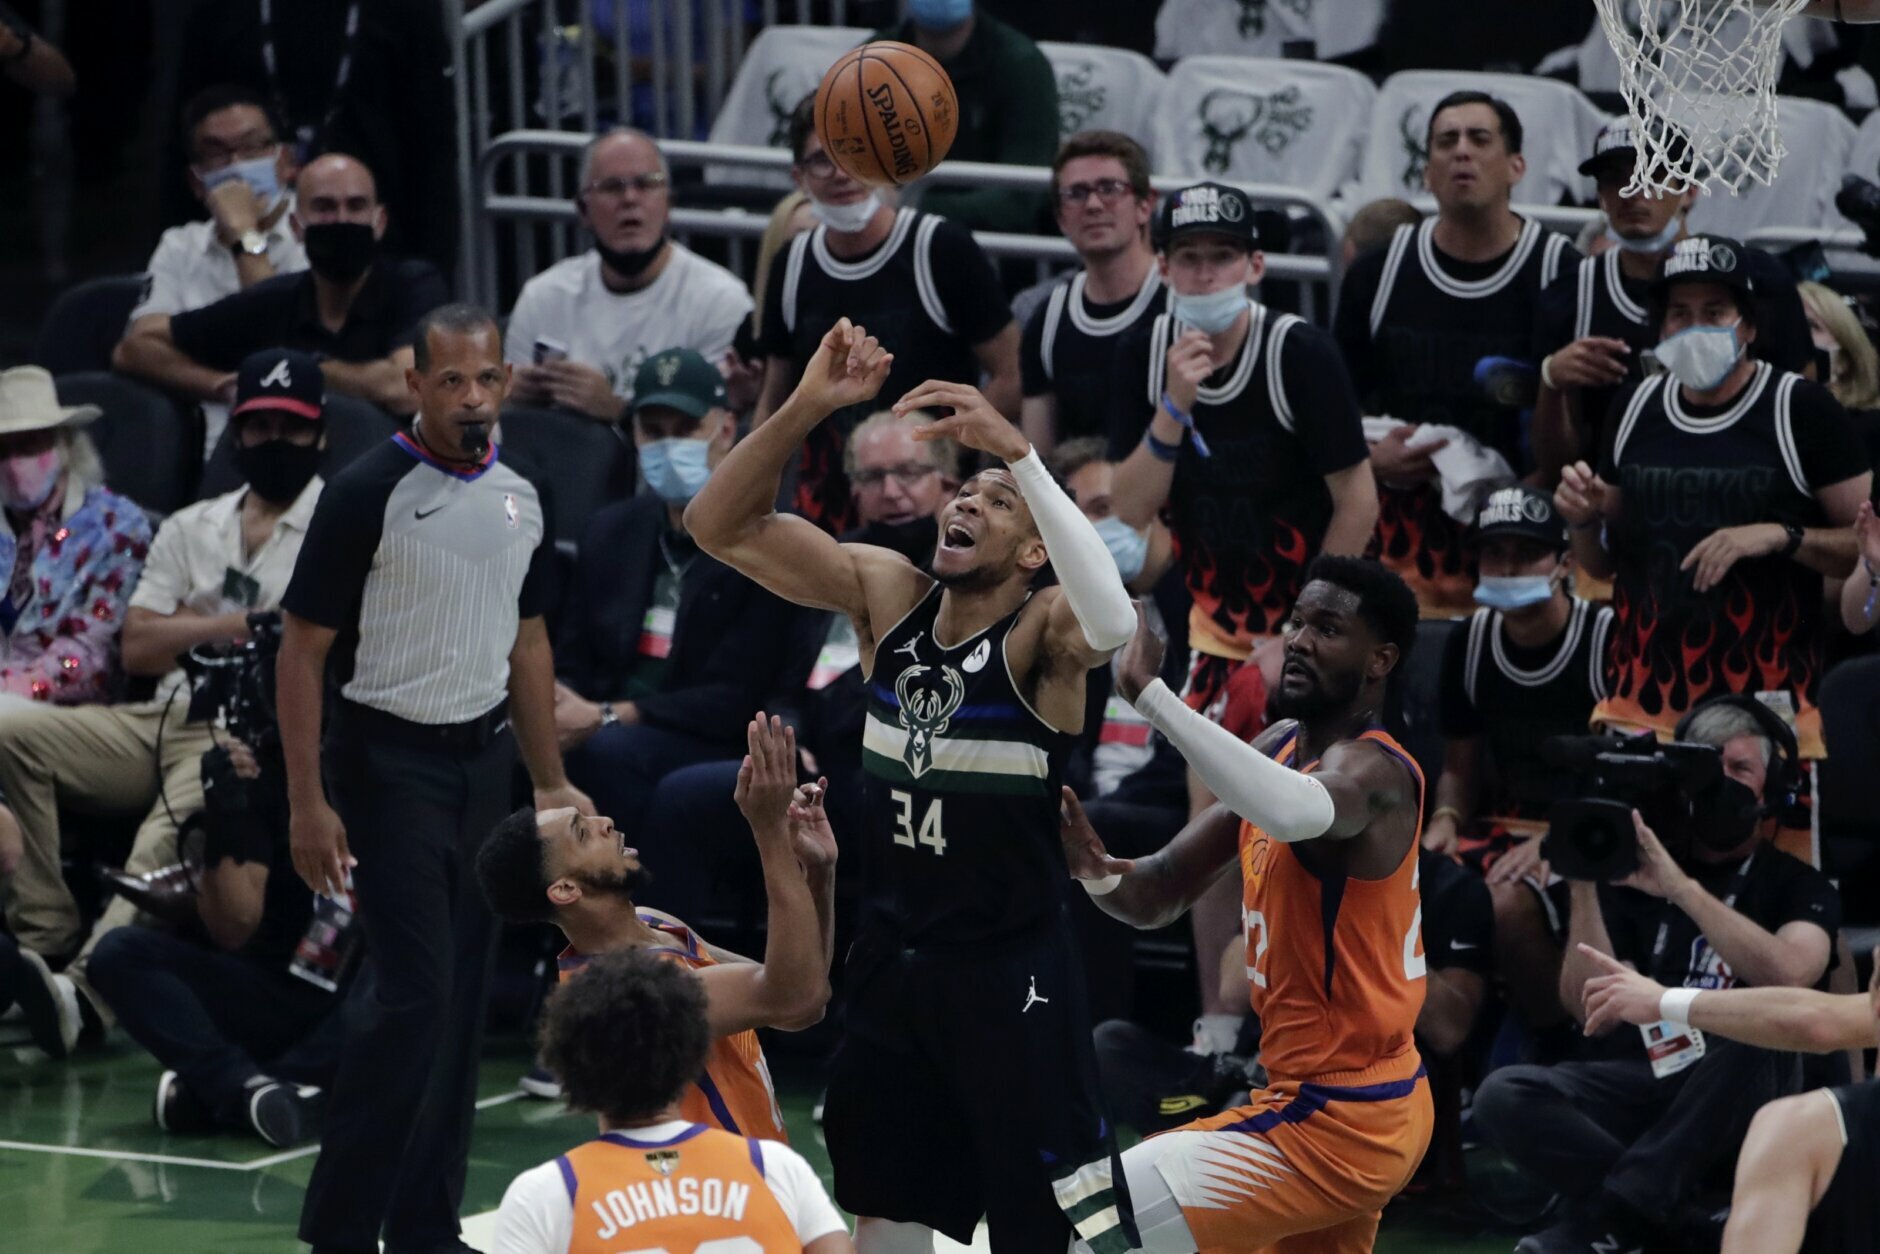 Fans Are Offended By Milwaukee Bucks' Jersey Design - Game 7